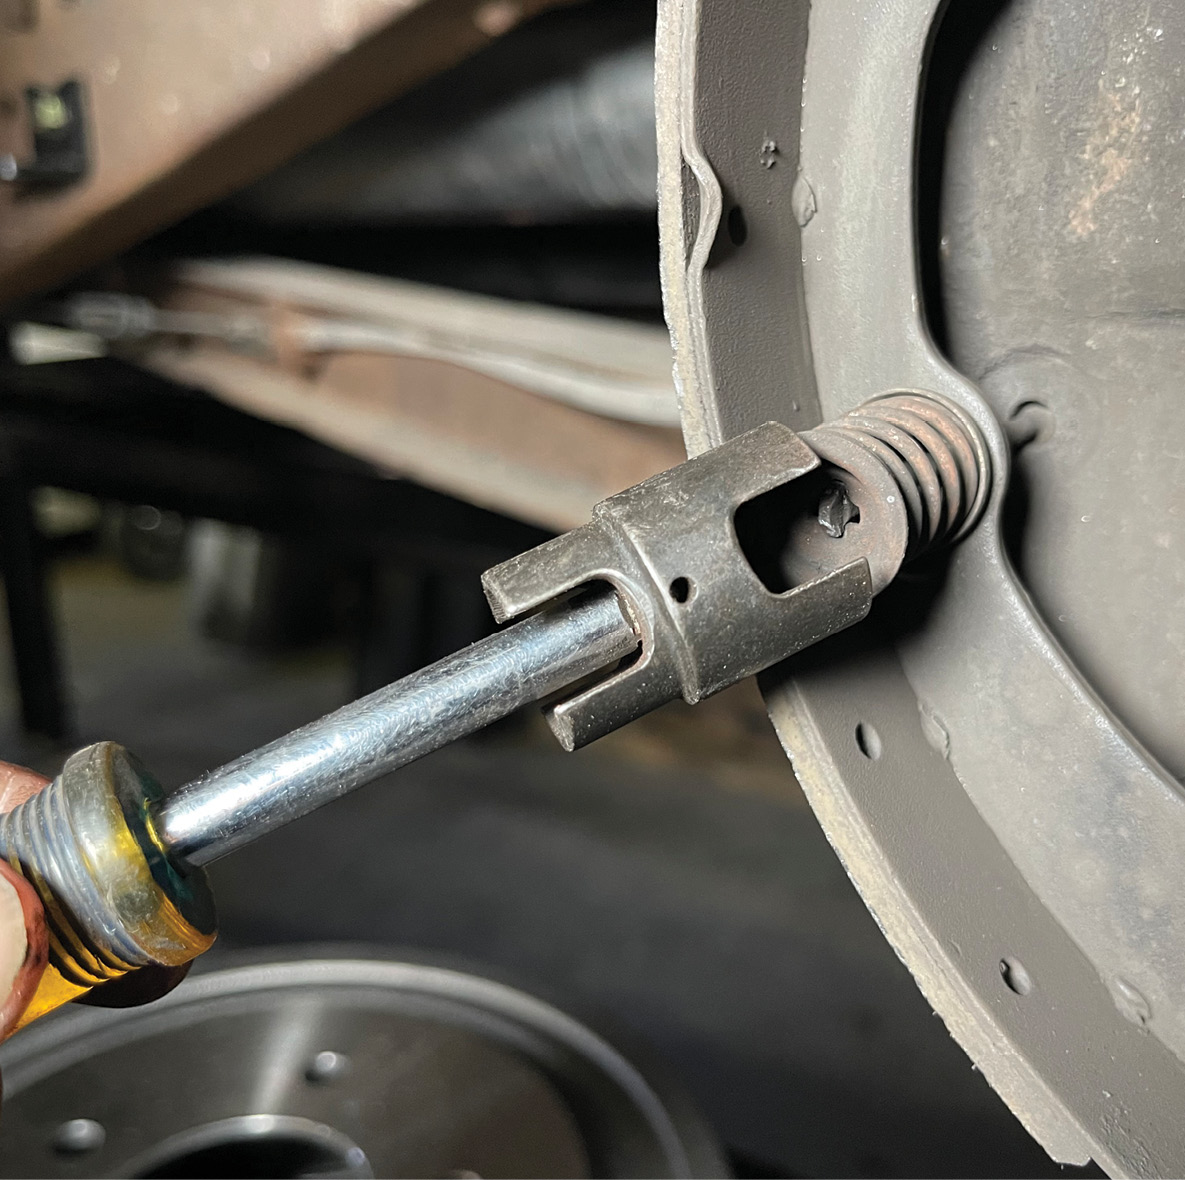 As the spring comes off you’ll want to rotate it around to disengage the adjuster screw assembly and its spring.